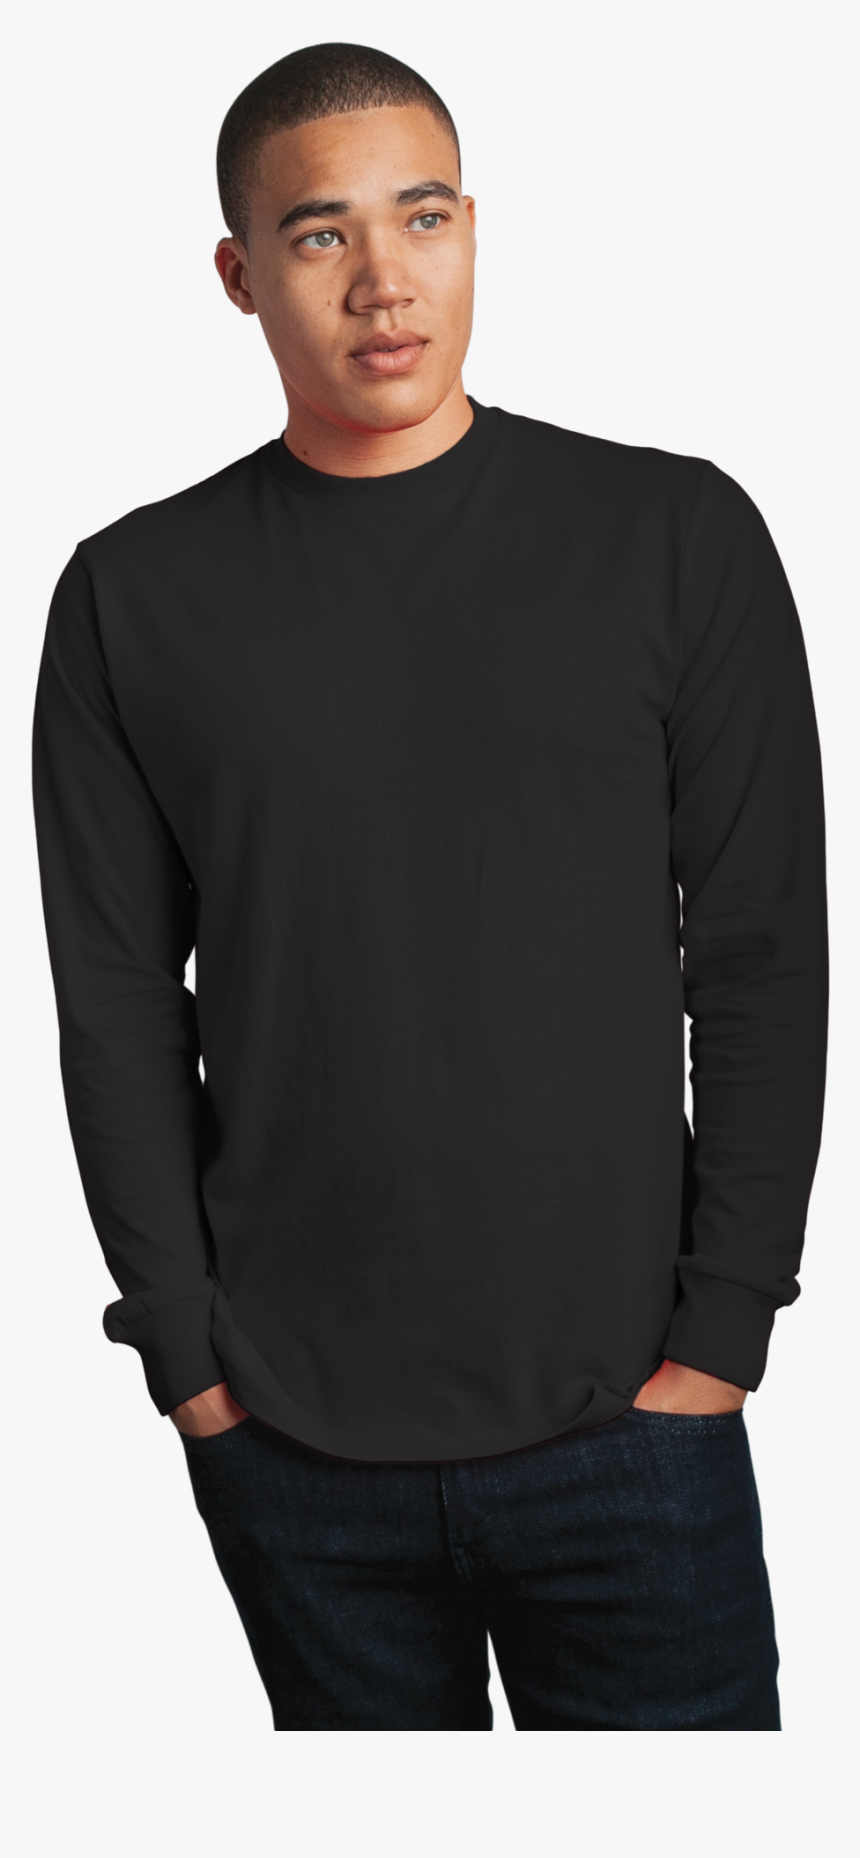 Blank T Shirts Png, Transparent Png, Free Download